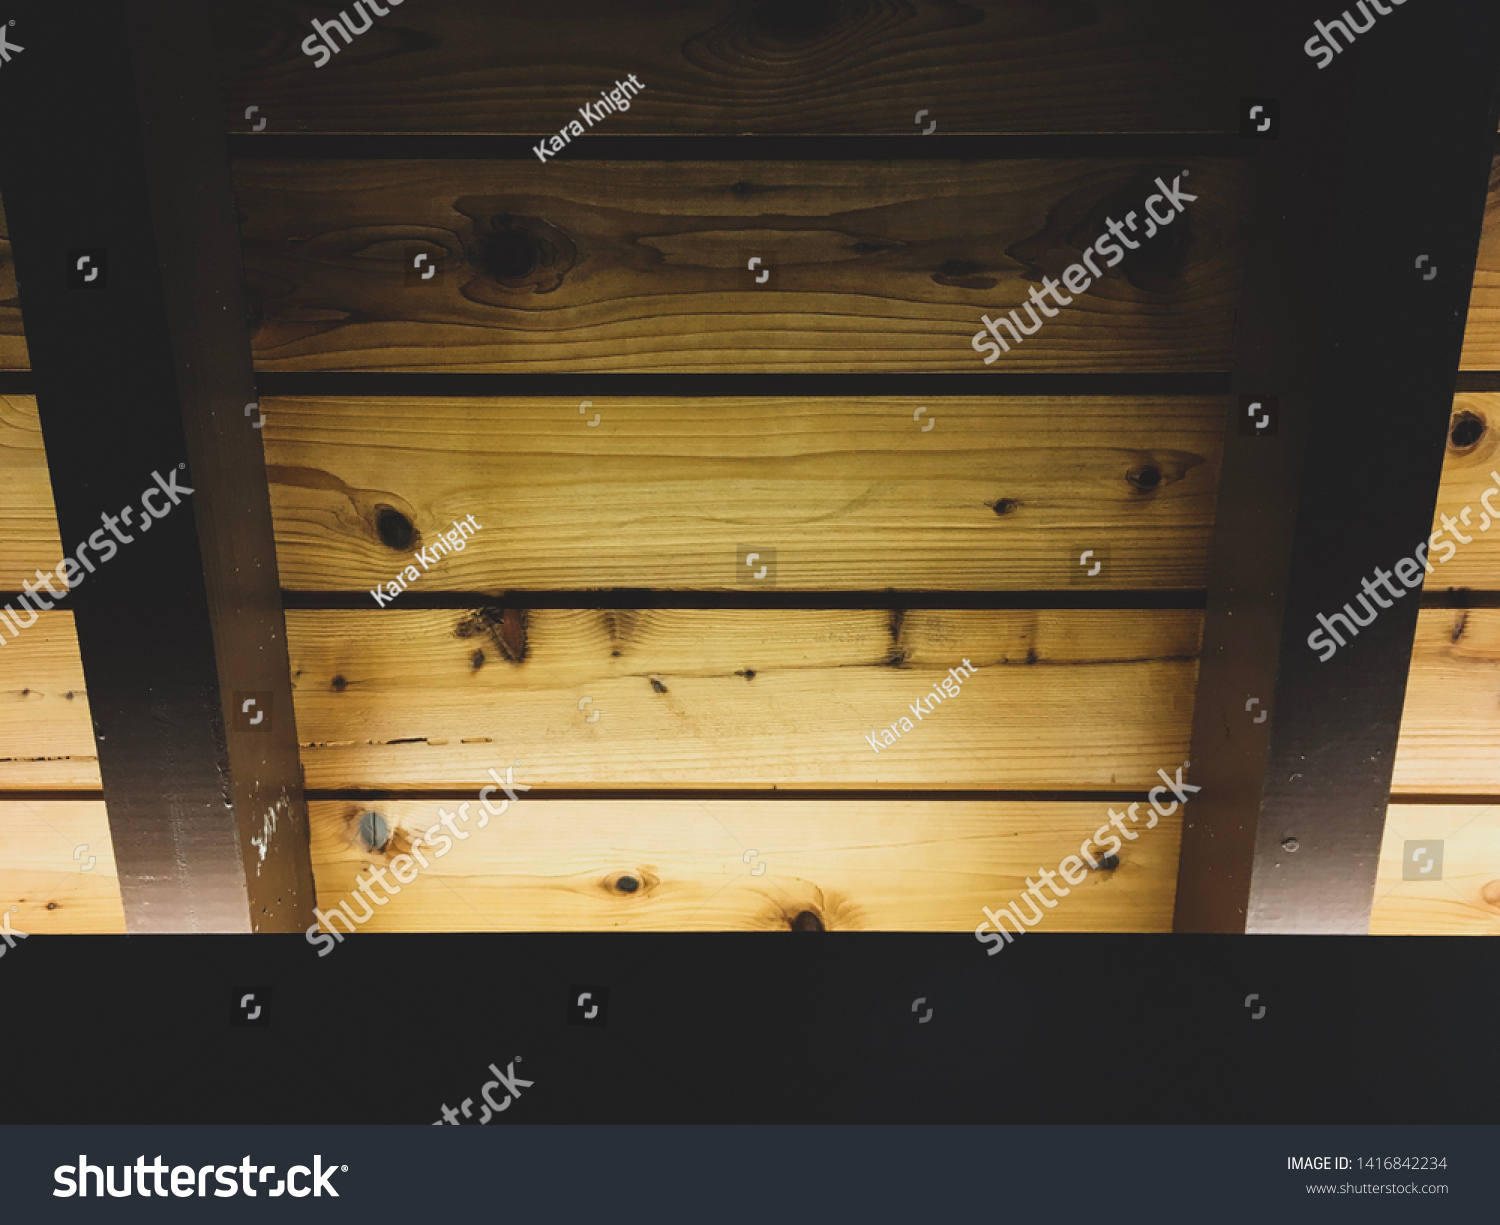 Wooden Plank Ceiling Illuminated By Lights Stock Photo Edit